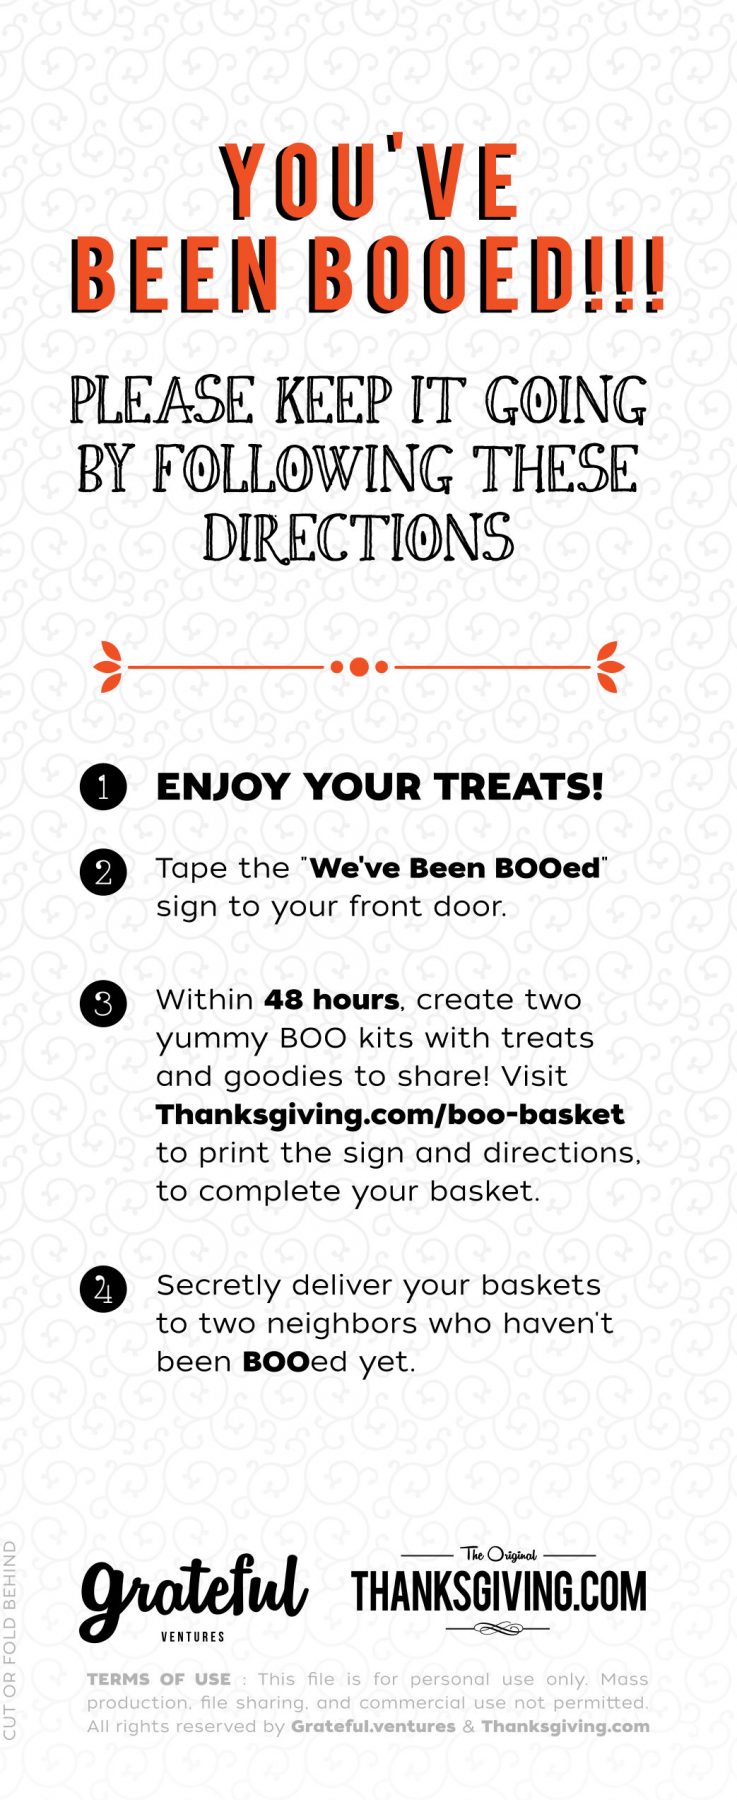 You've been BOOed! Directions for the treat swap